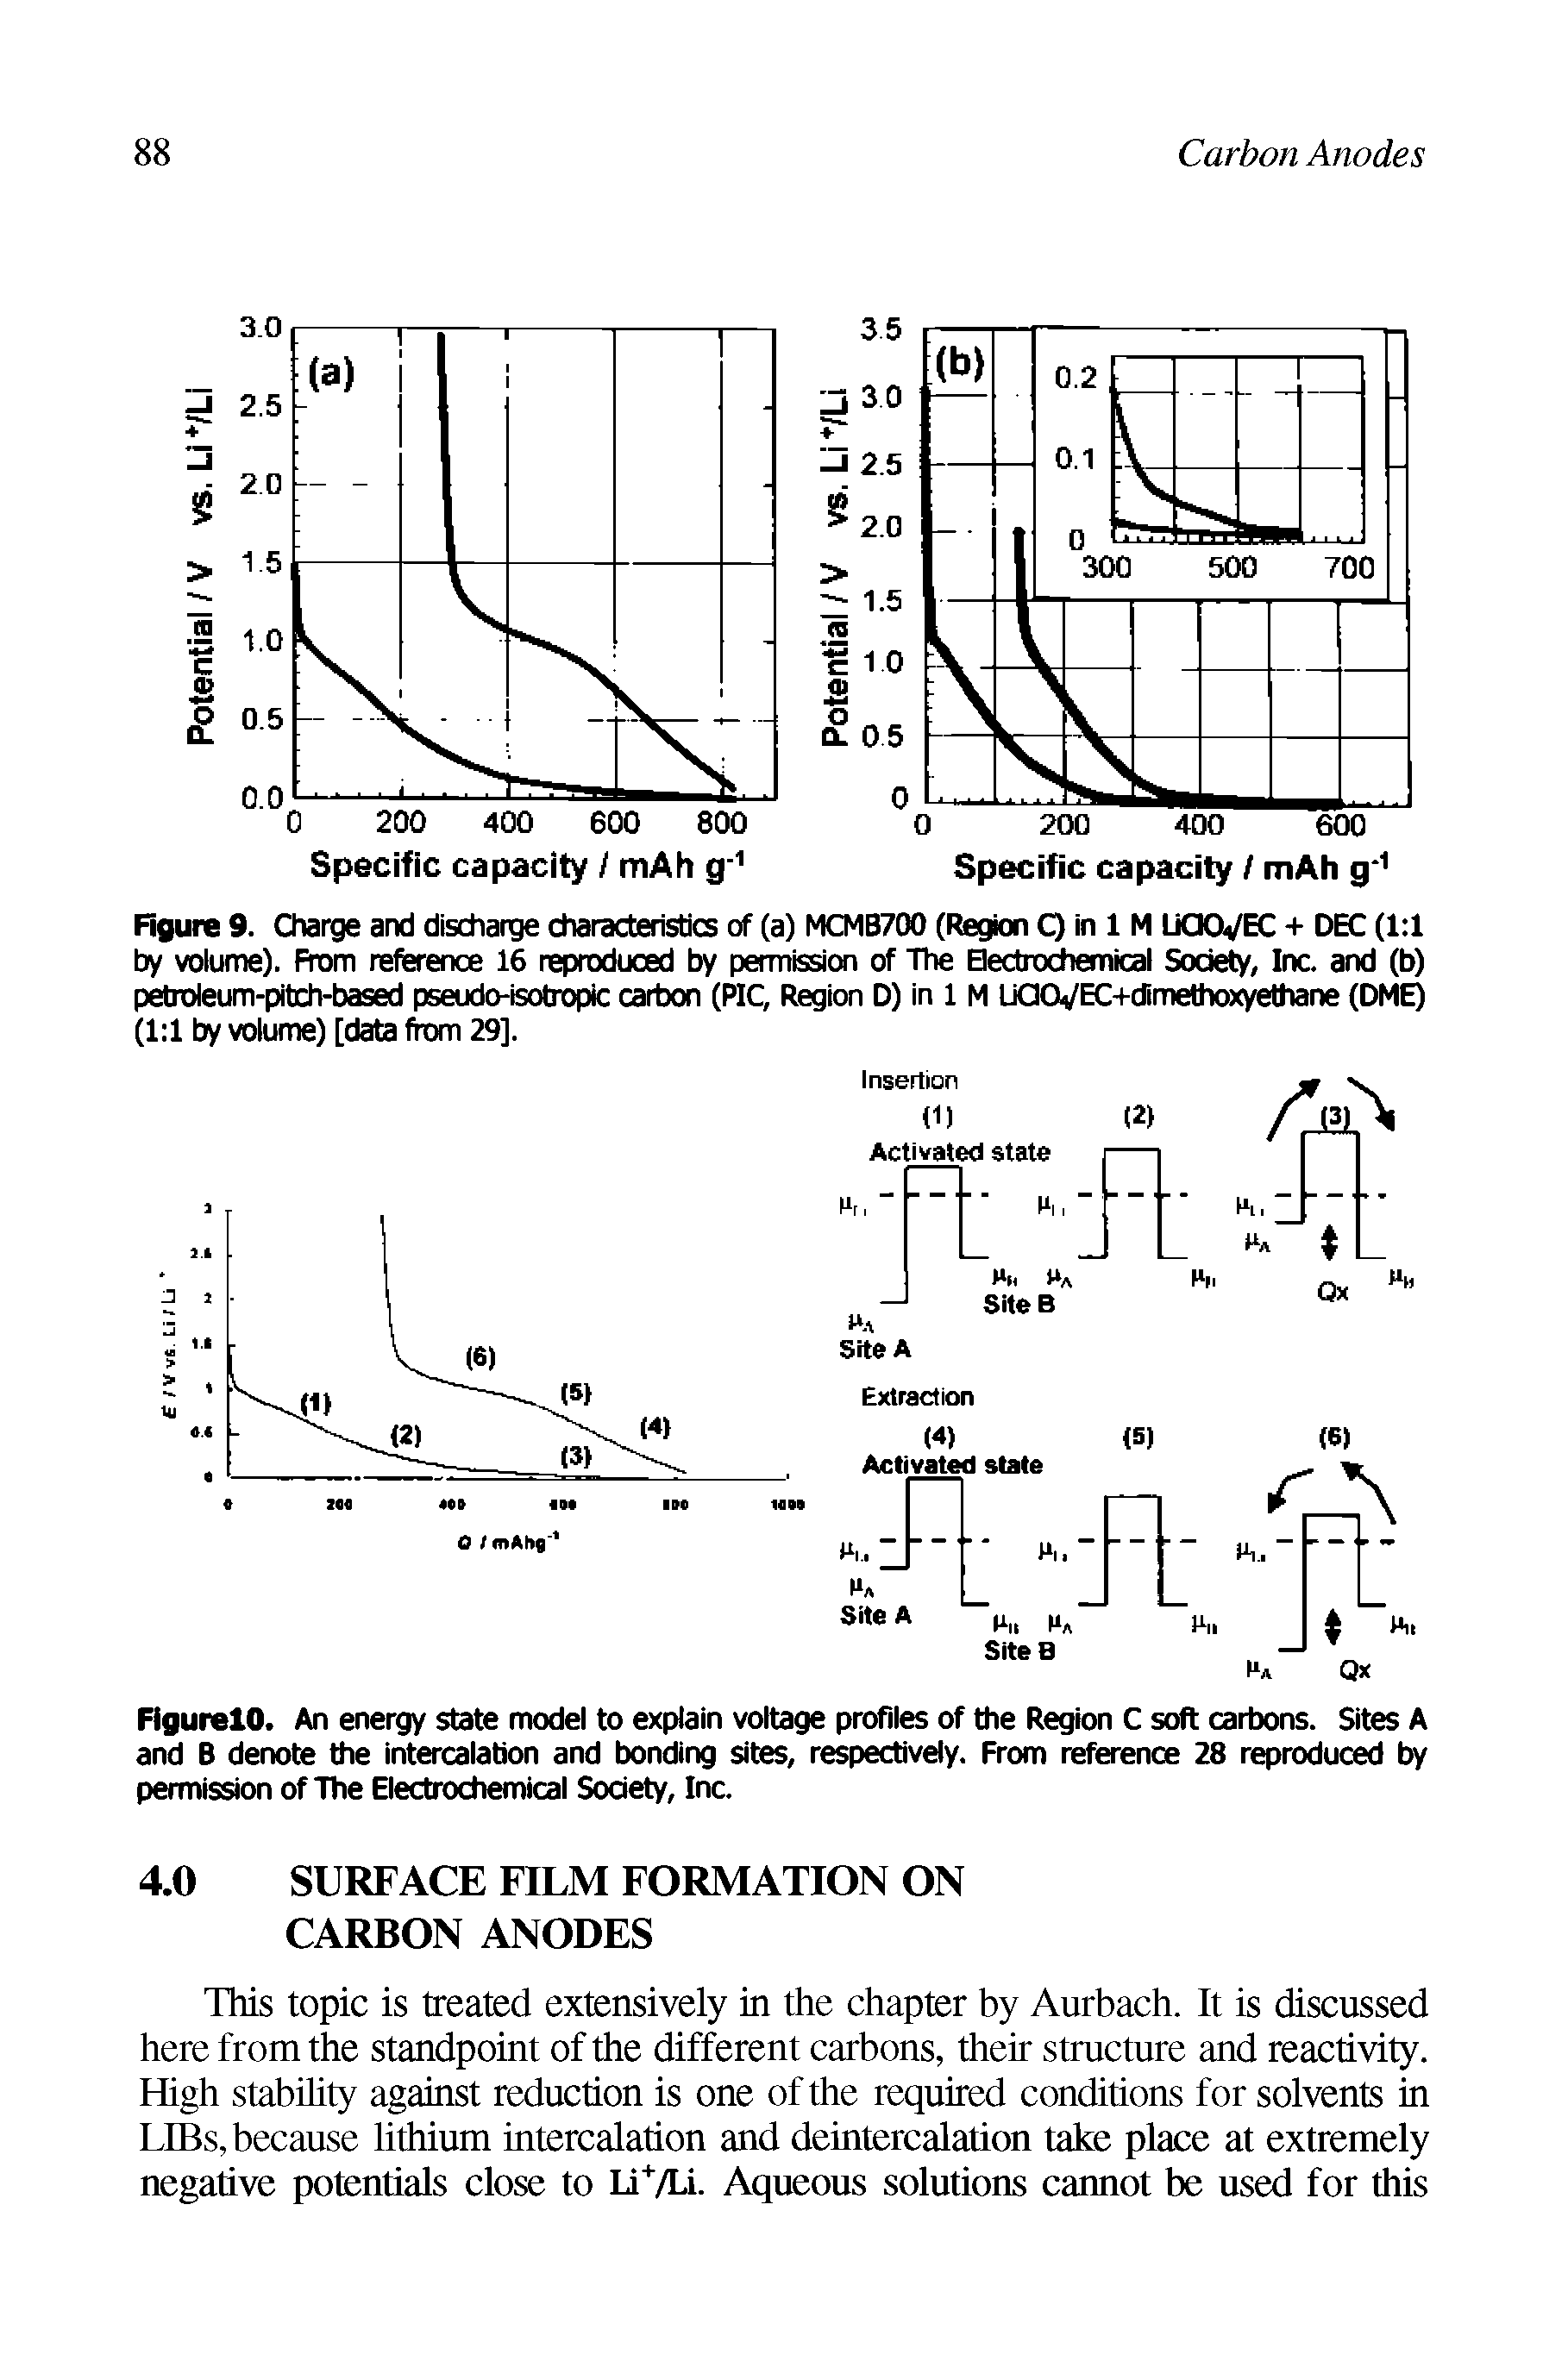 Figure 9. Charge and discharge characteristics of (a) MCMB700 (itegion Q hi 1M UCKVEC + DEC (l l by volume). From reference 16 reproduced by permission of The Bectrochemical Society, Inc and (b) petroleum-pitdvbased pseudo-isotropic caitxxi (nc. Region D) in l M UCKVEC-t-cftriettioxyediane (DME) (1 1 by volume) [data from 29].